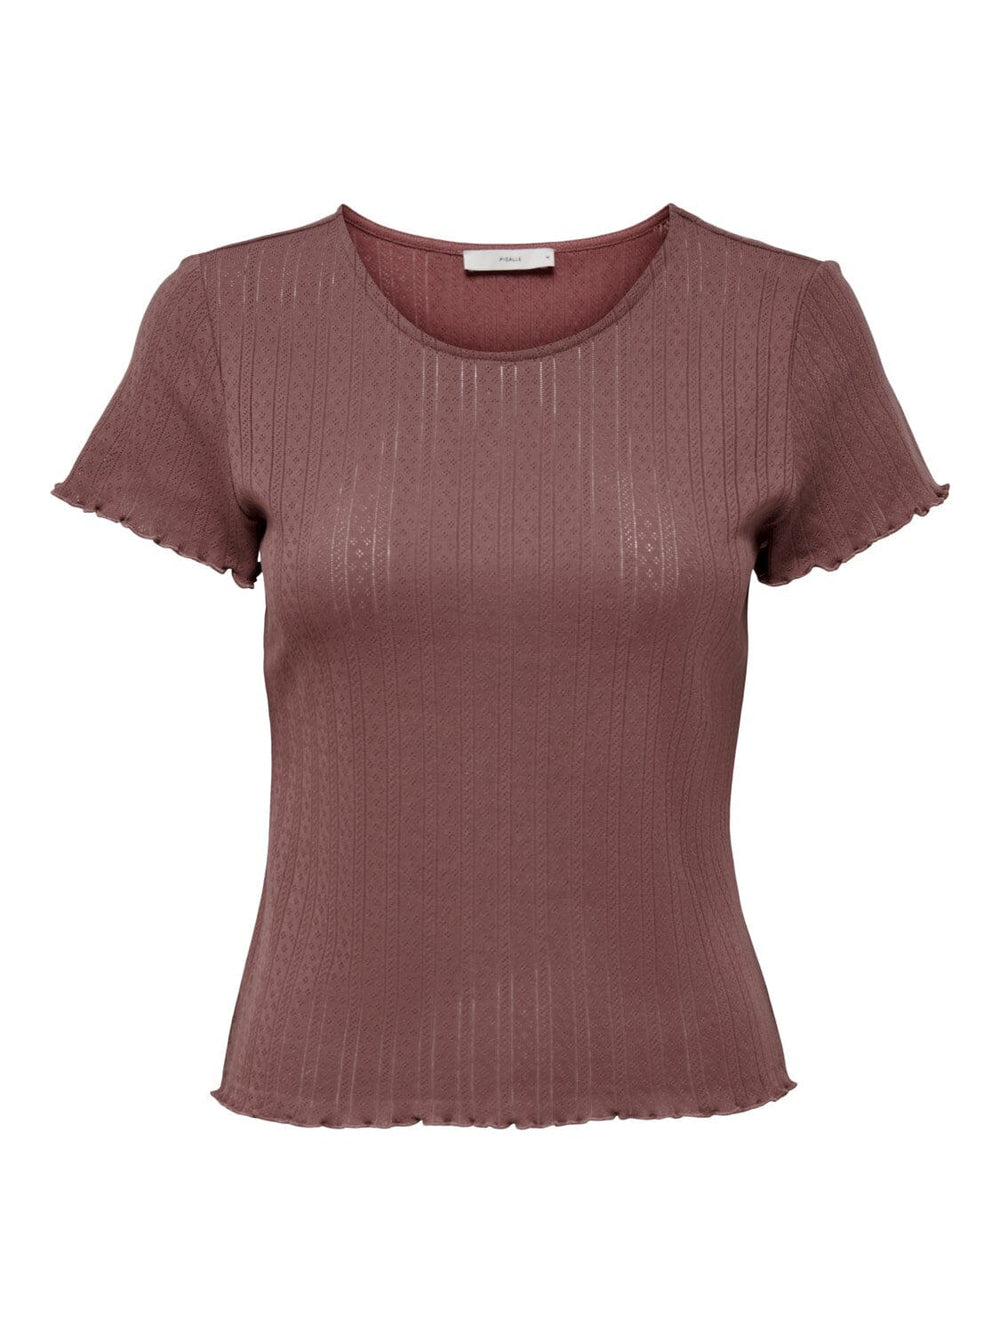 Only - Onlcarlotta S/S Top - 3872447 Rose Brown Toppe 